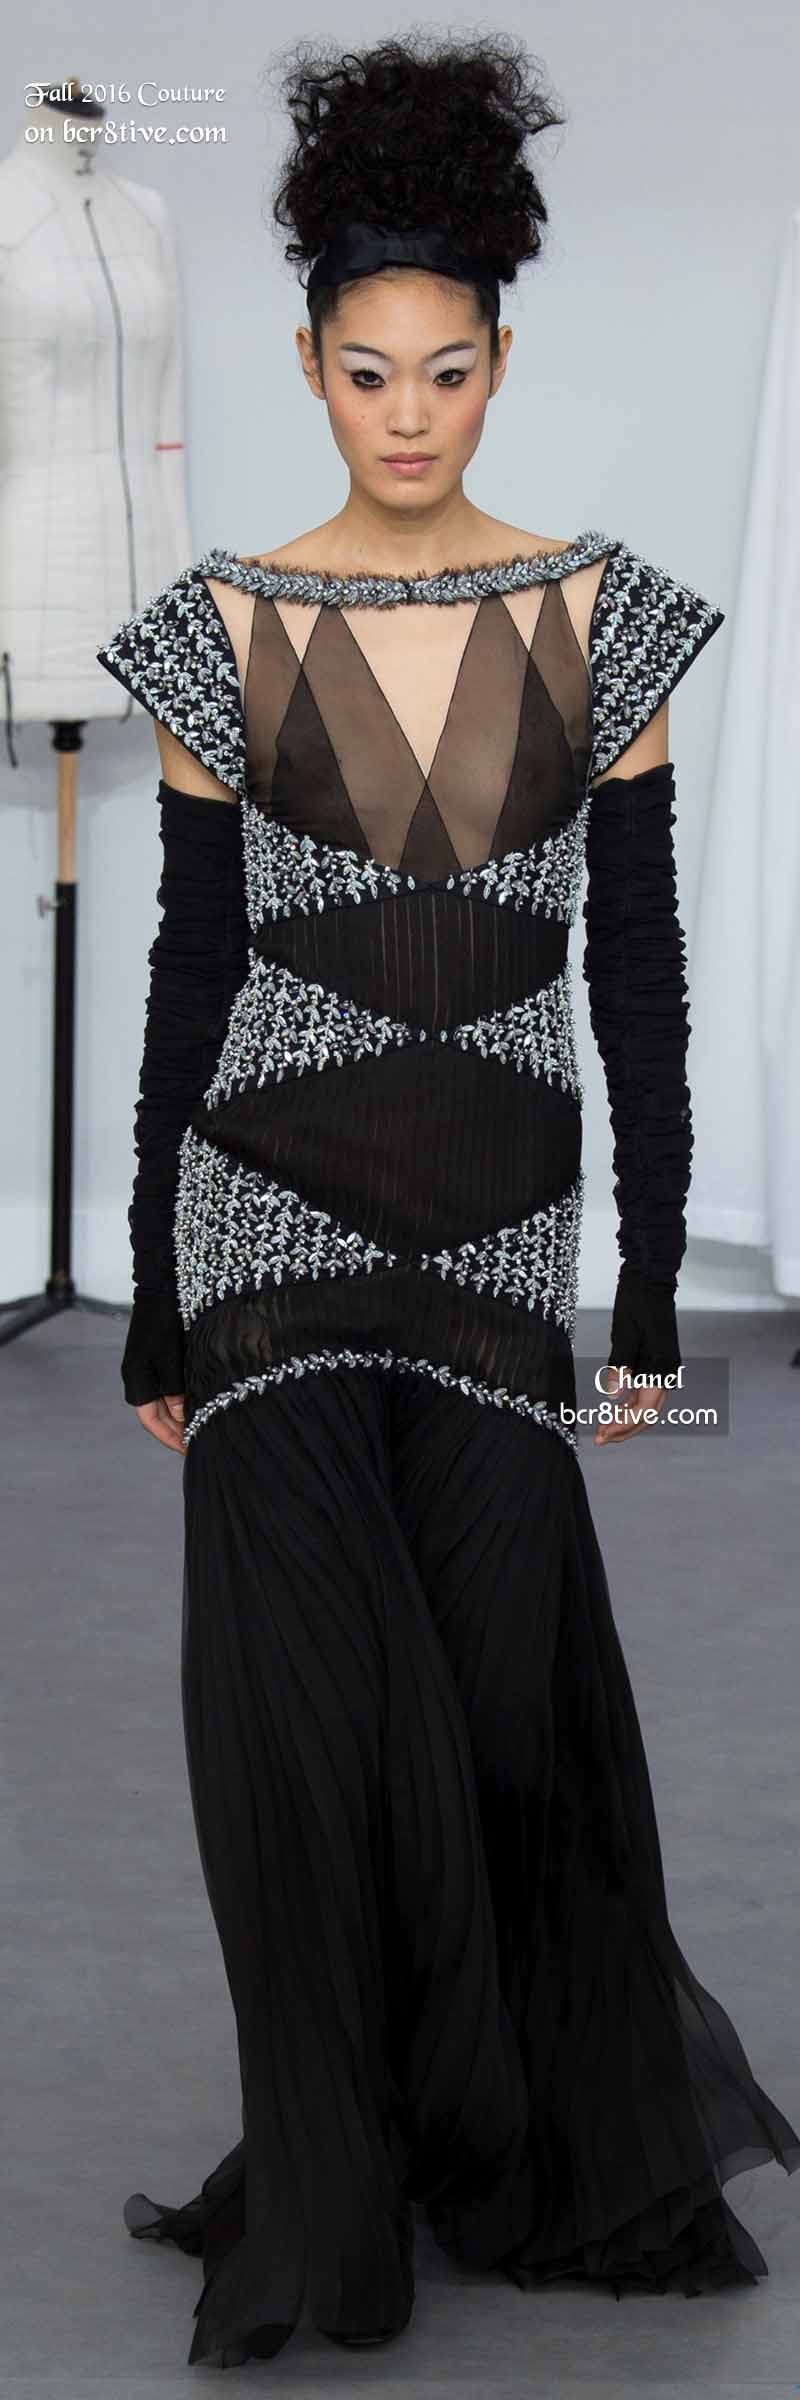 Chanel - The Best Fall 2016 Haute Couture Fashion